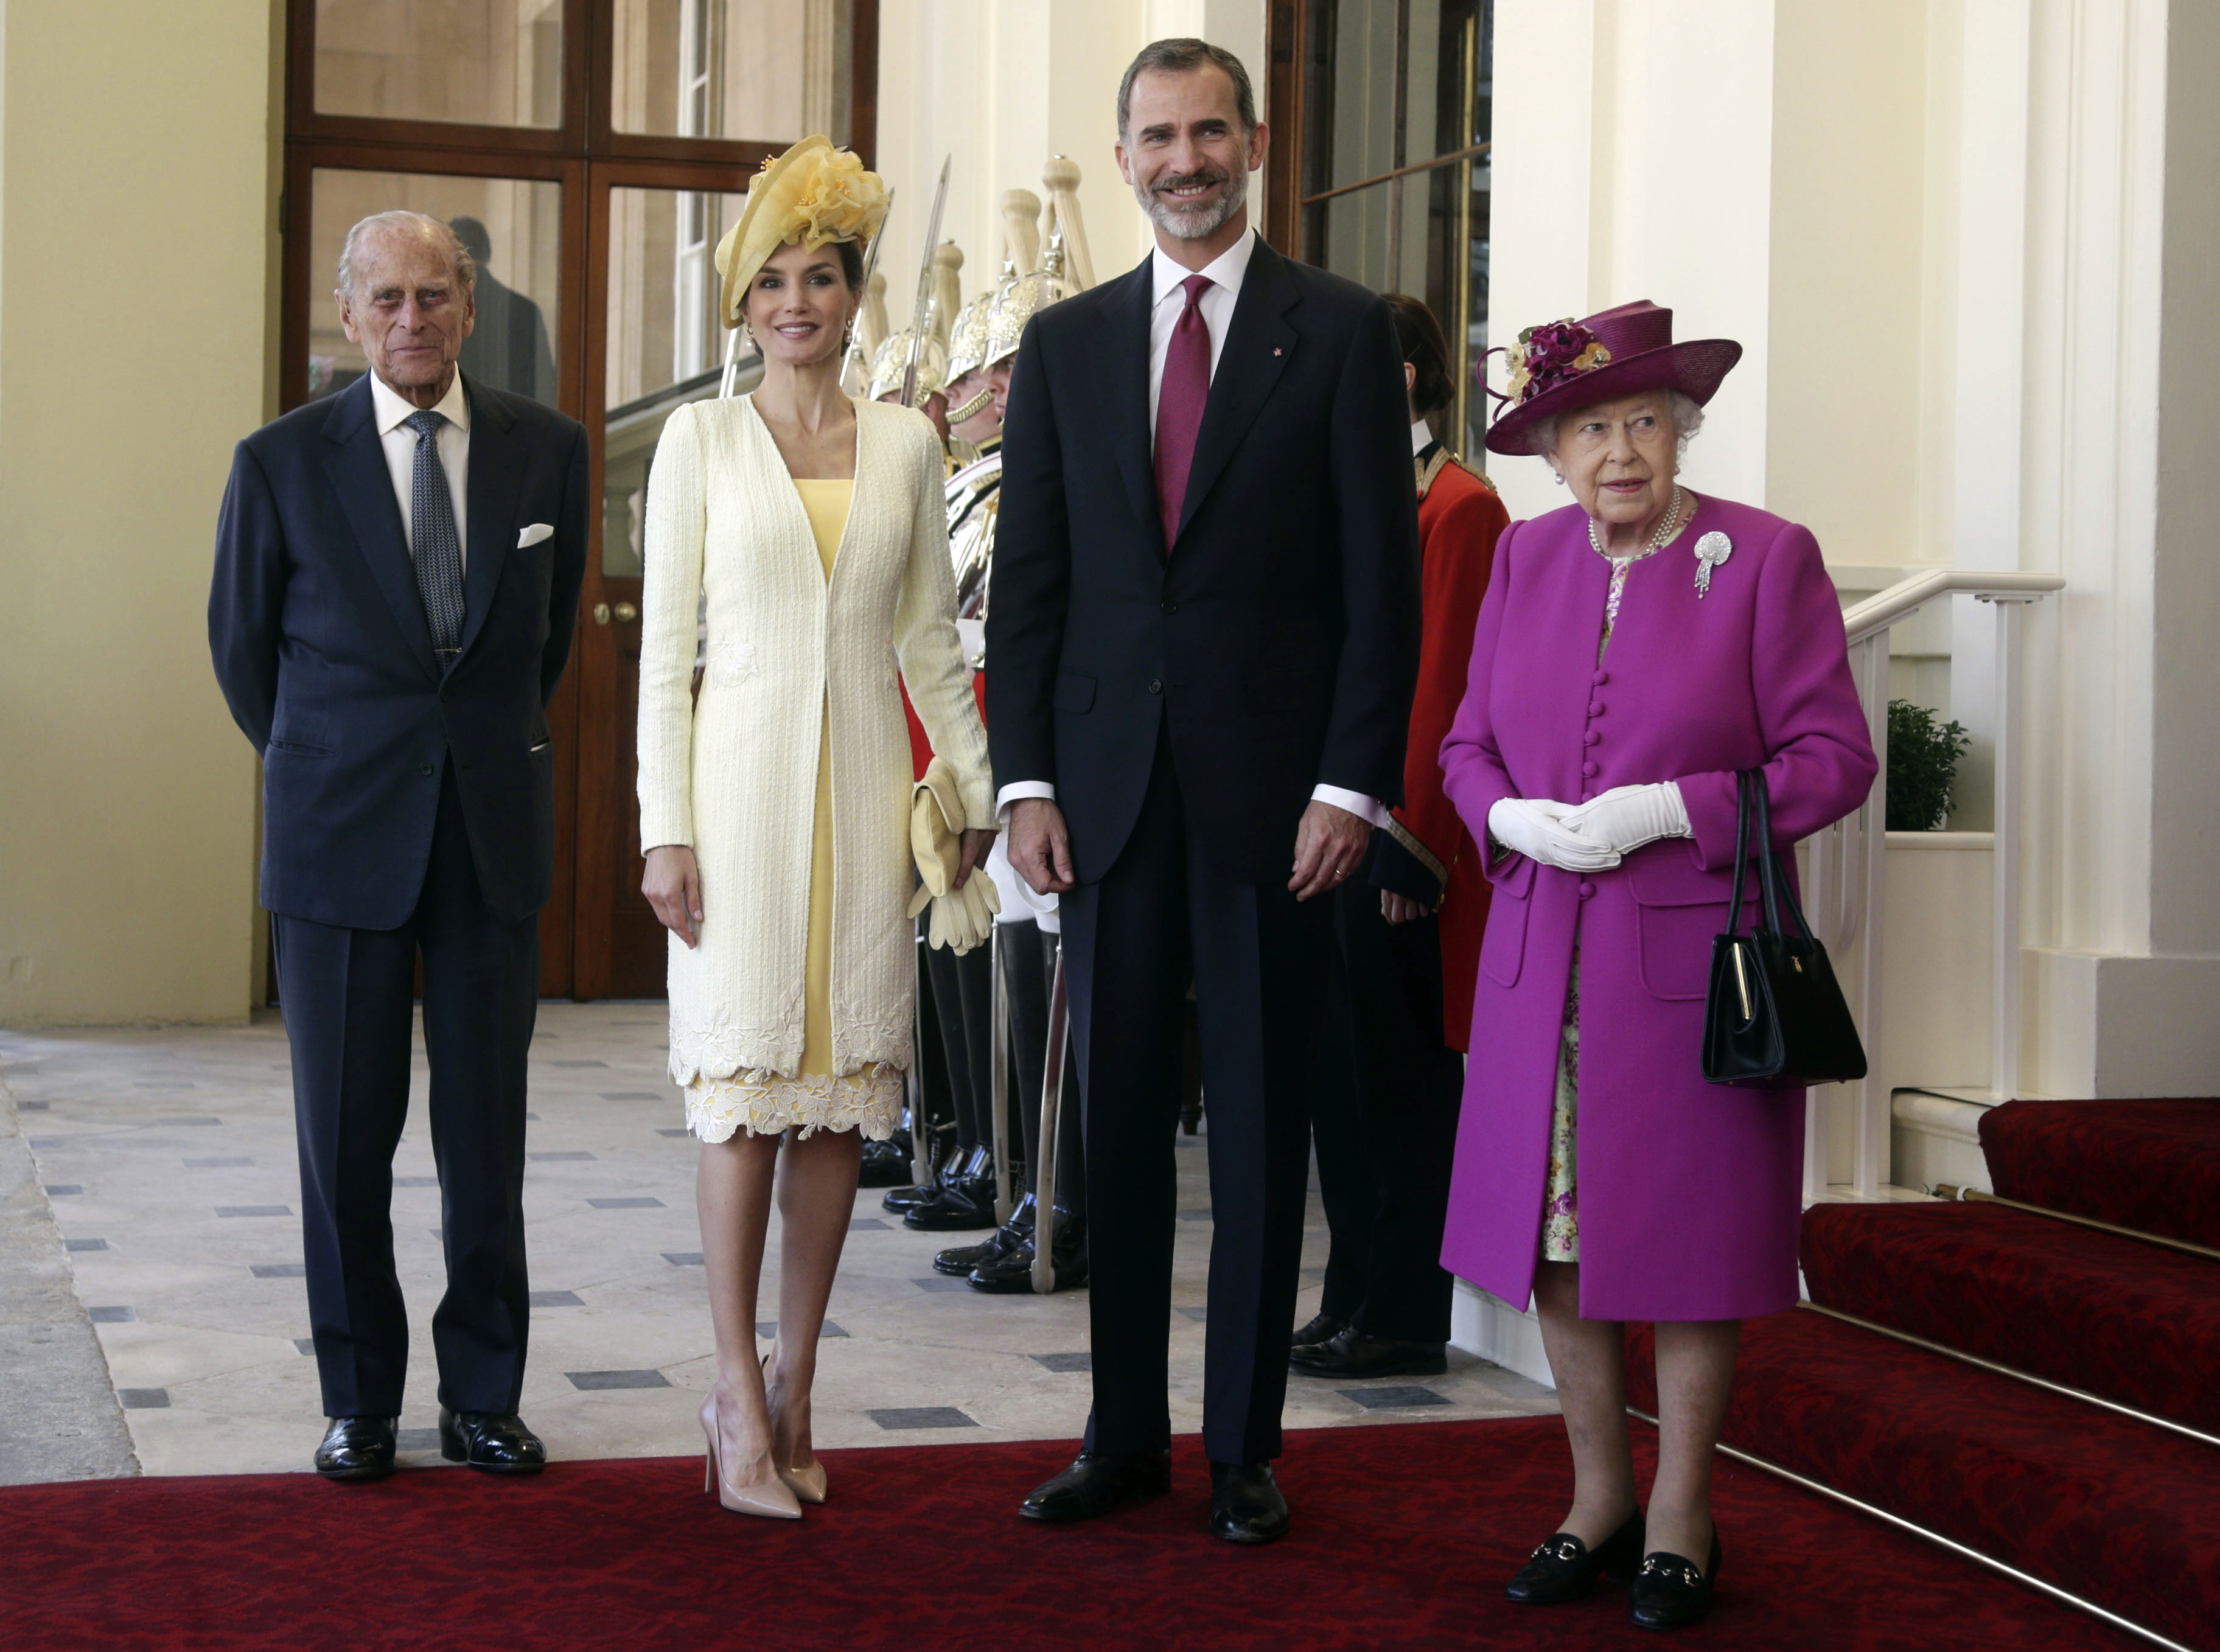 Britain's Queen Elizabeth II stands with Spain's King Felipe and his wife Queen Letizia and Prince Philip, left, after arriving in a state carriage to Buckingham Palace, London 